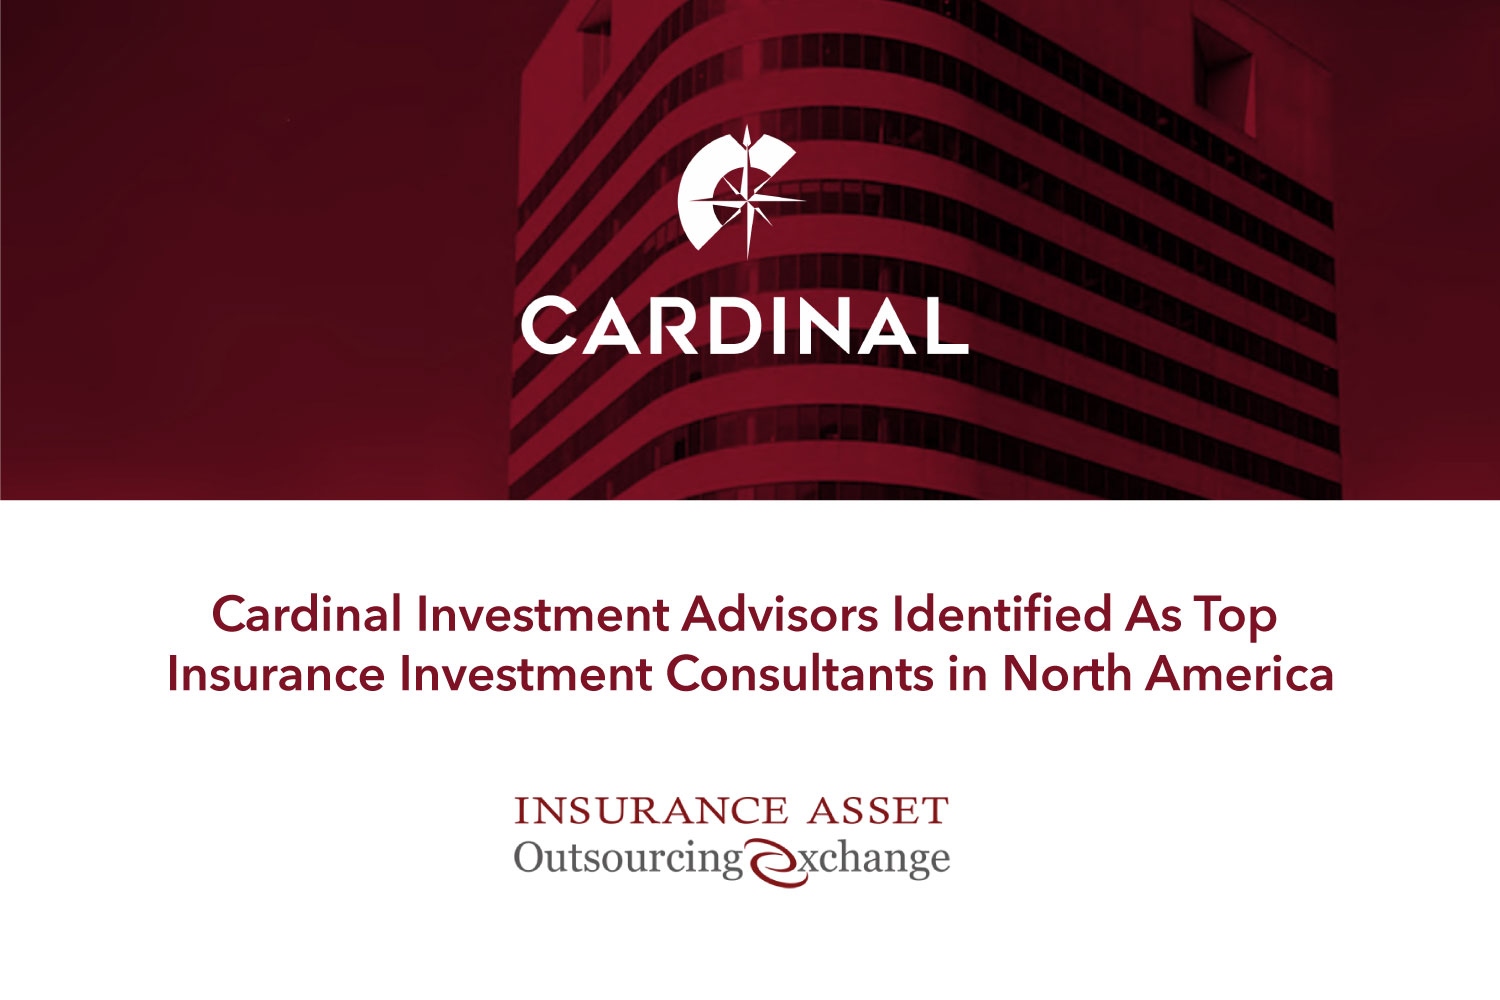 Cardinal Investment Advisors Identified As Top Insurance Investment Consultant Firm In North America